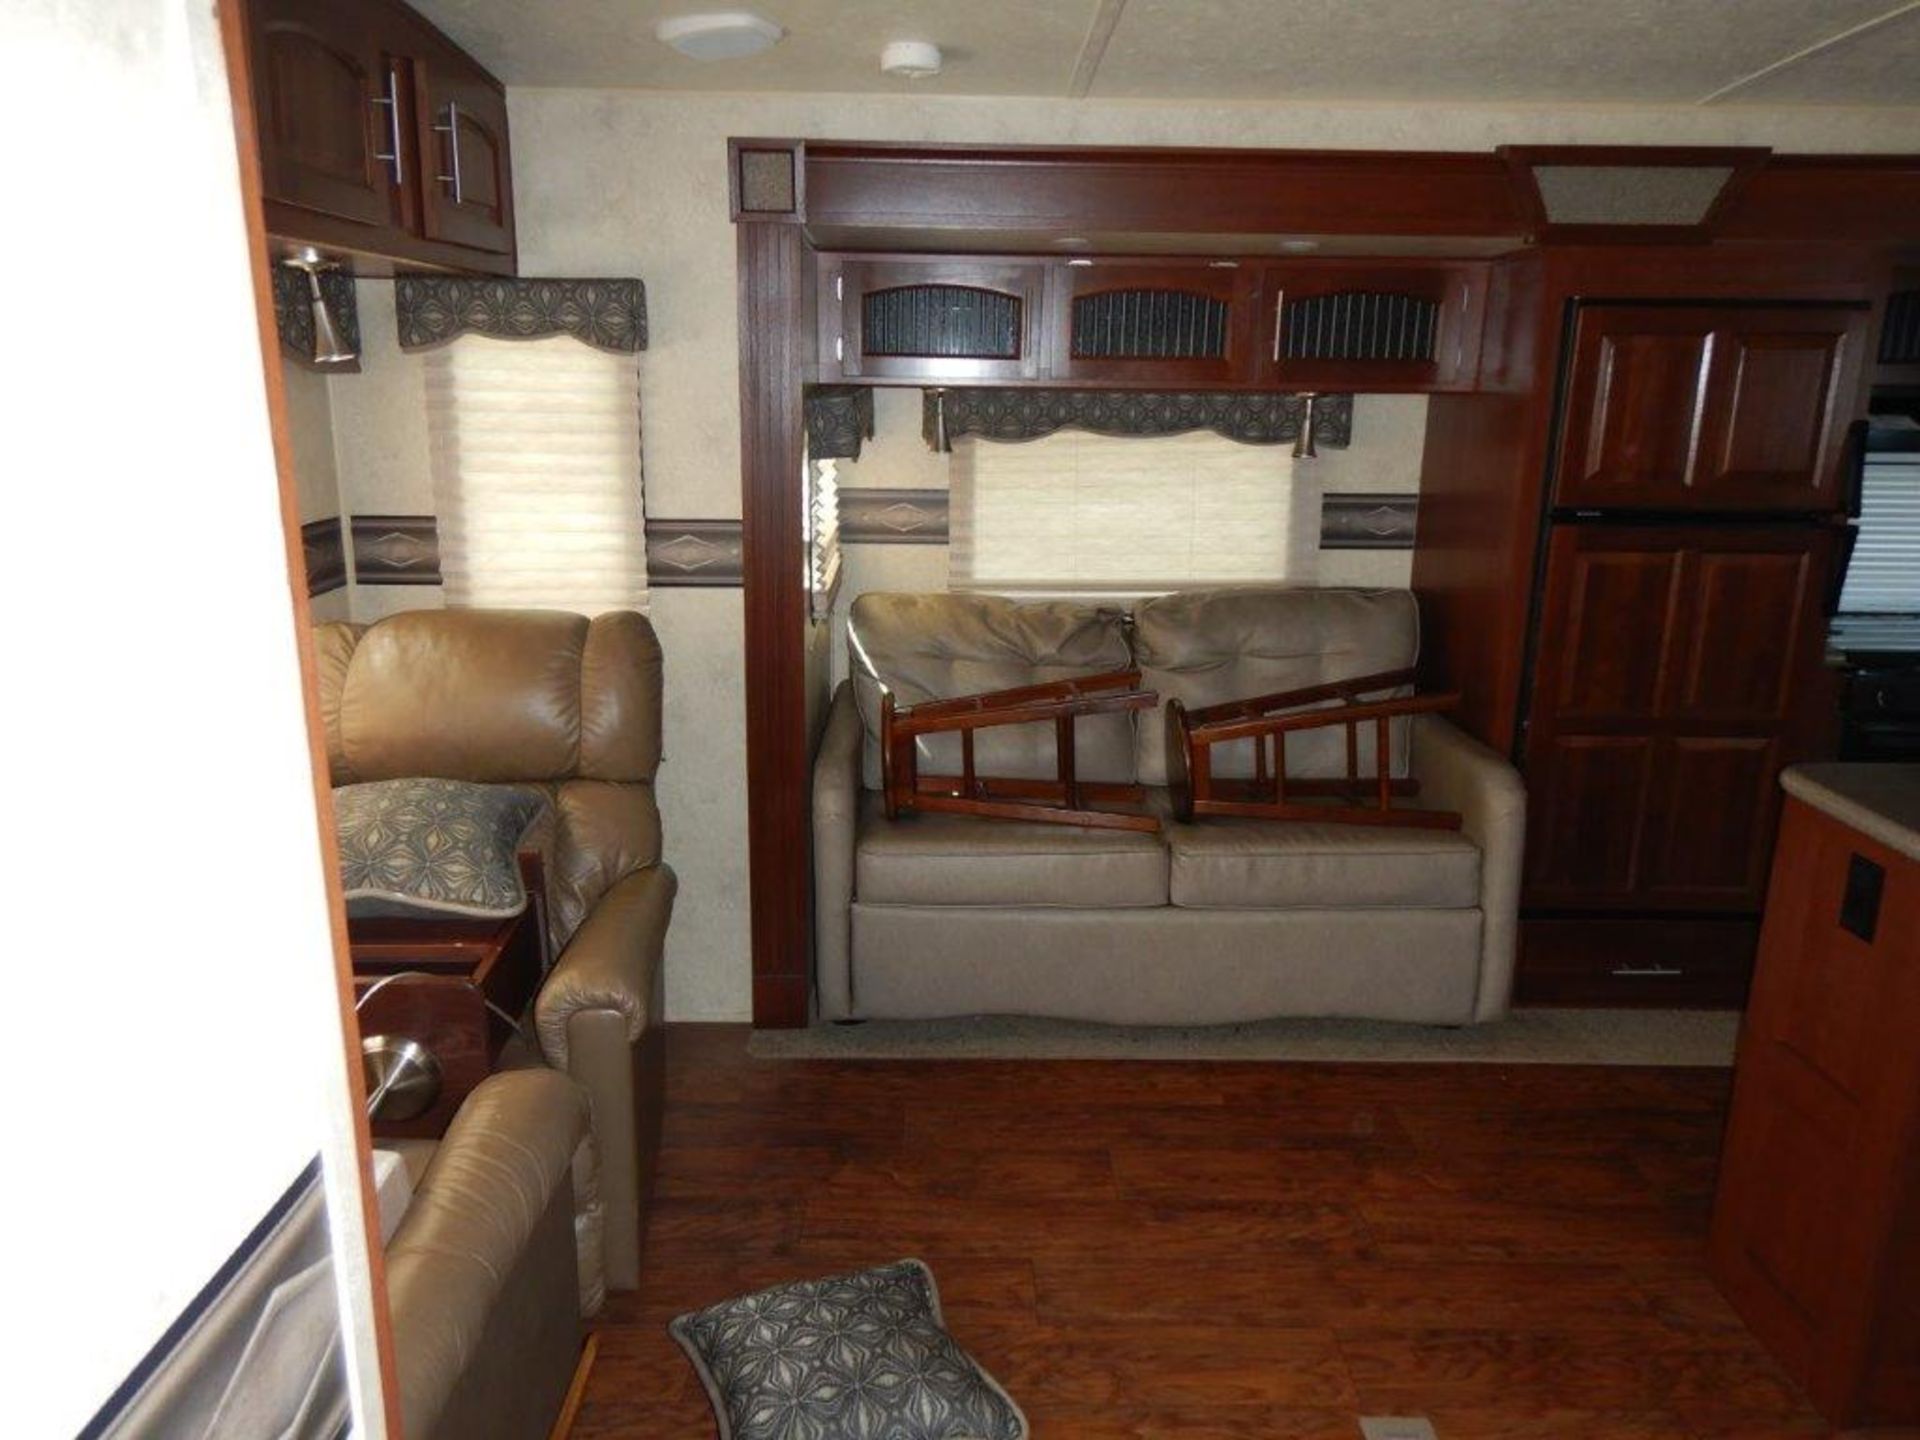 2015 FLAGSTAFF CLASSIC SUPER LITE 32FT TRAVEL TRAILER, 3 SLIDES, GREAT CONDITION BELOW 800 ROAD KMS! - Image 22 of 37